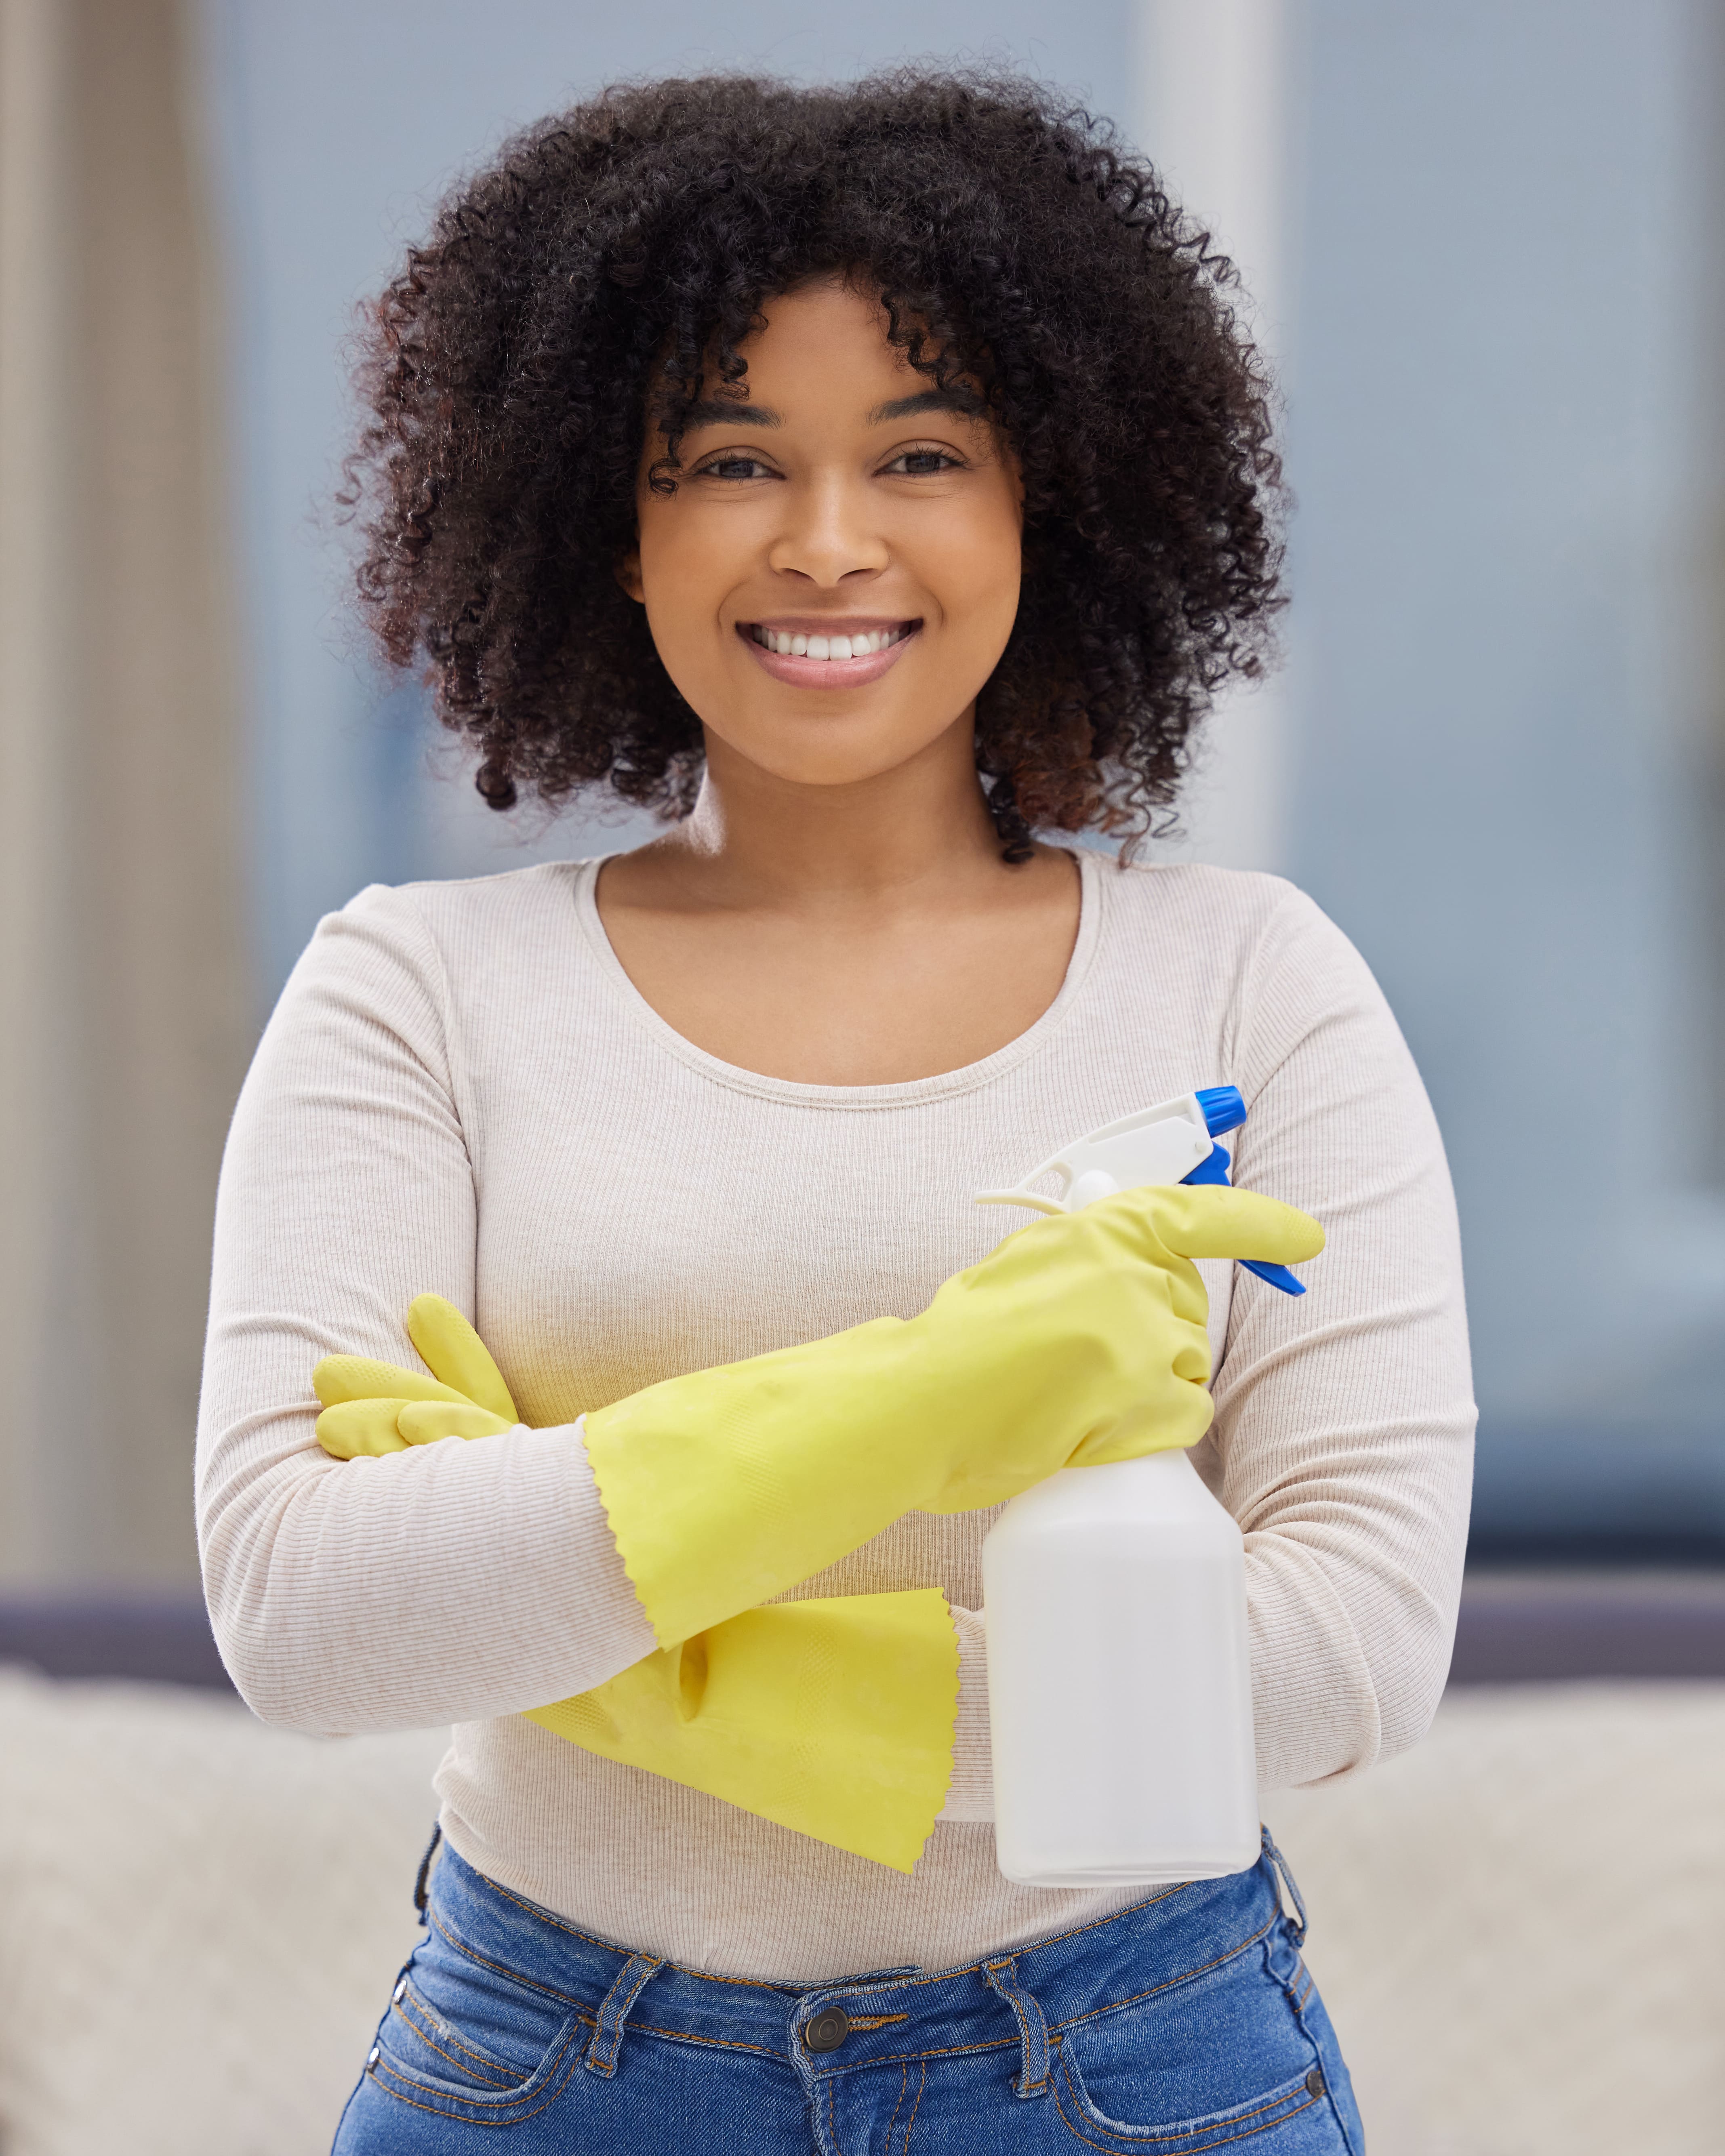 female cleaner holding cleaning supplies and smiling